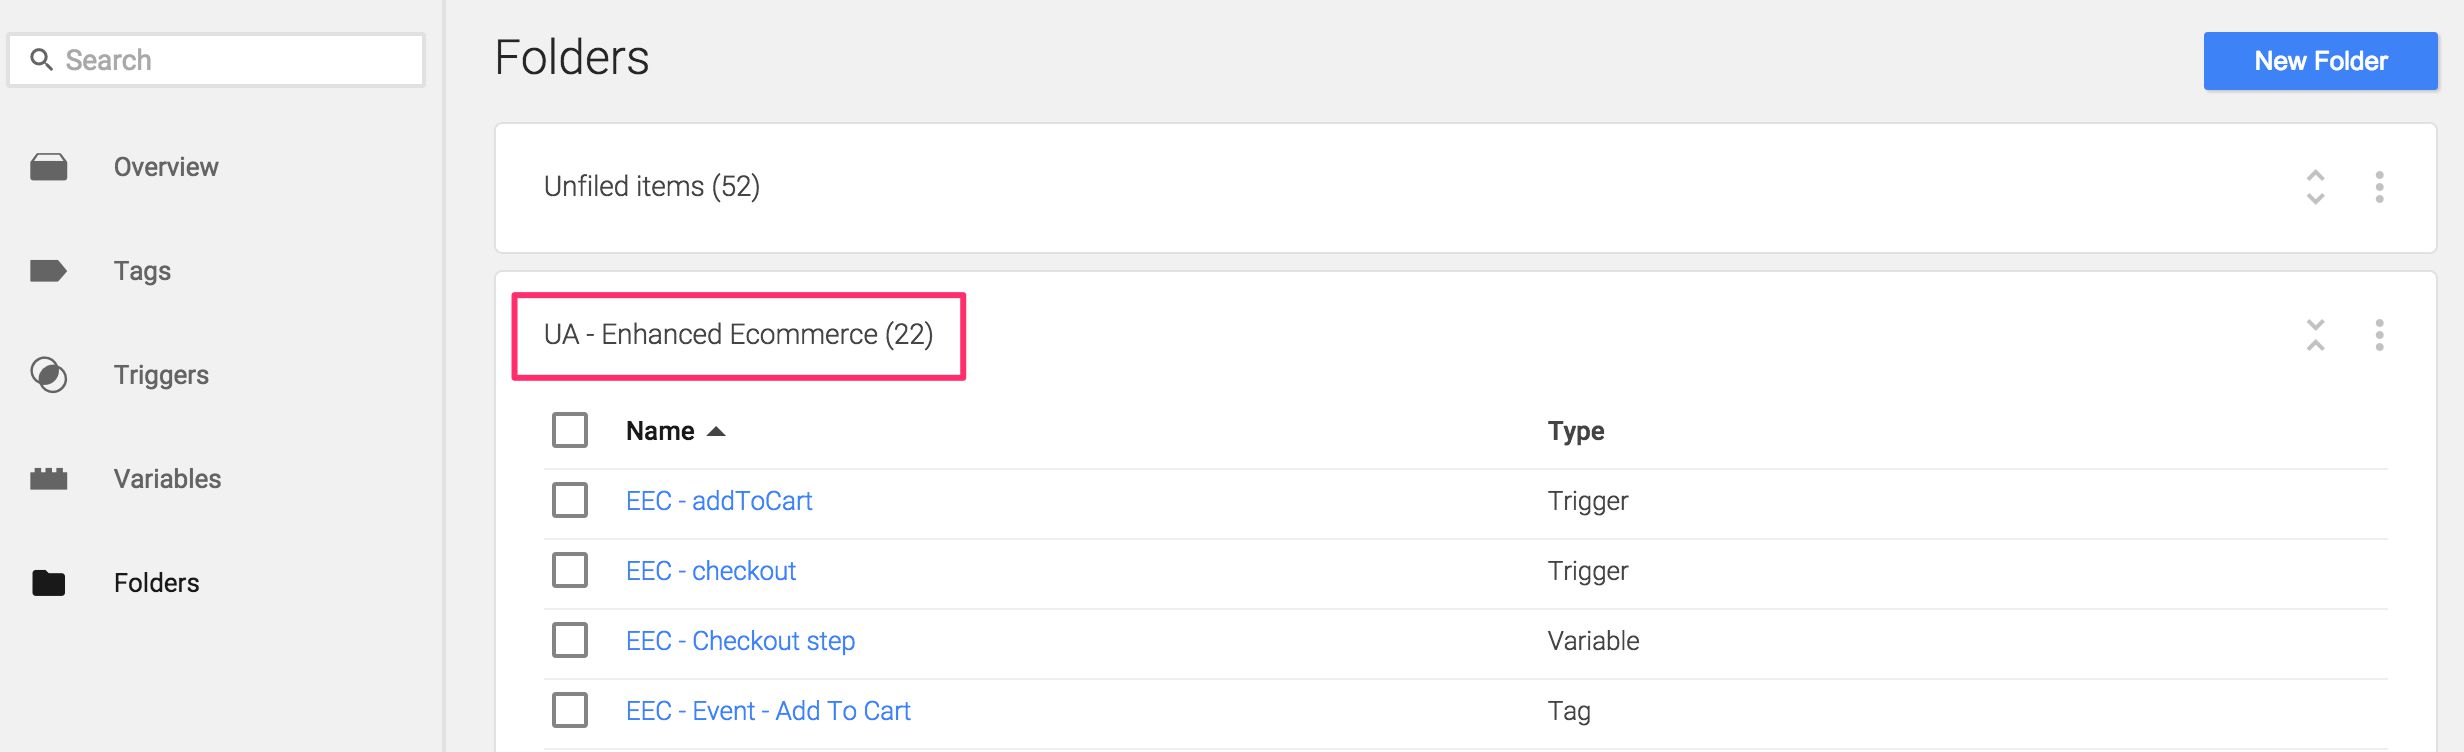 Folders in Google Tag Manager